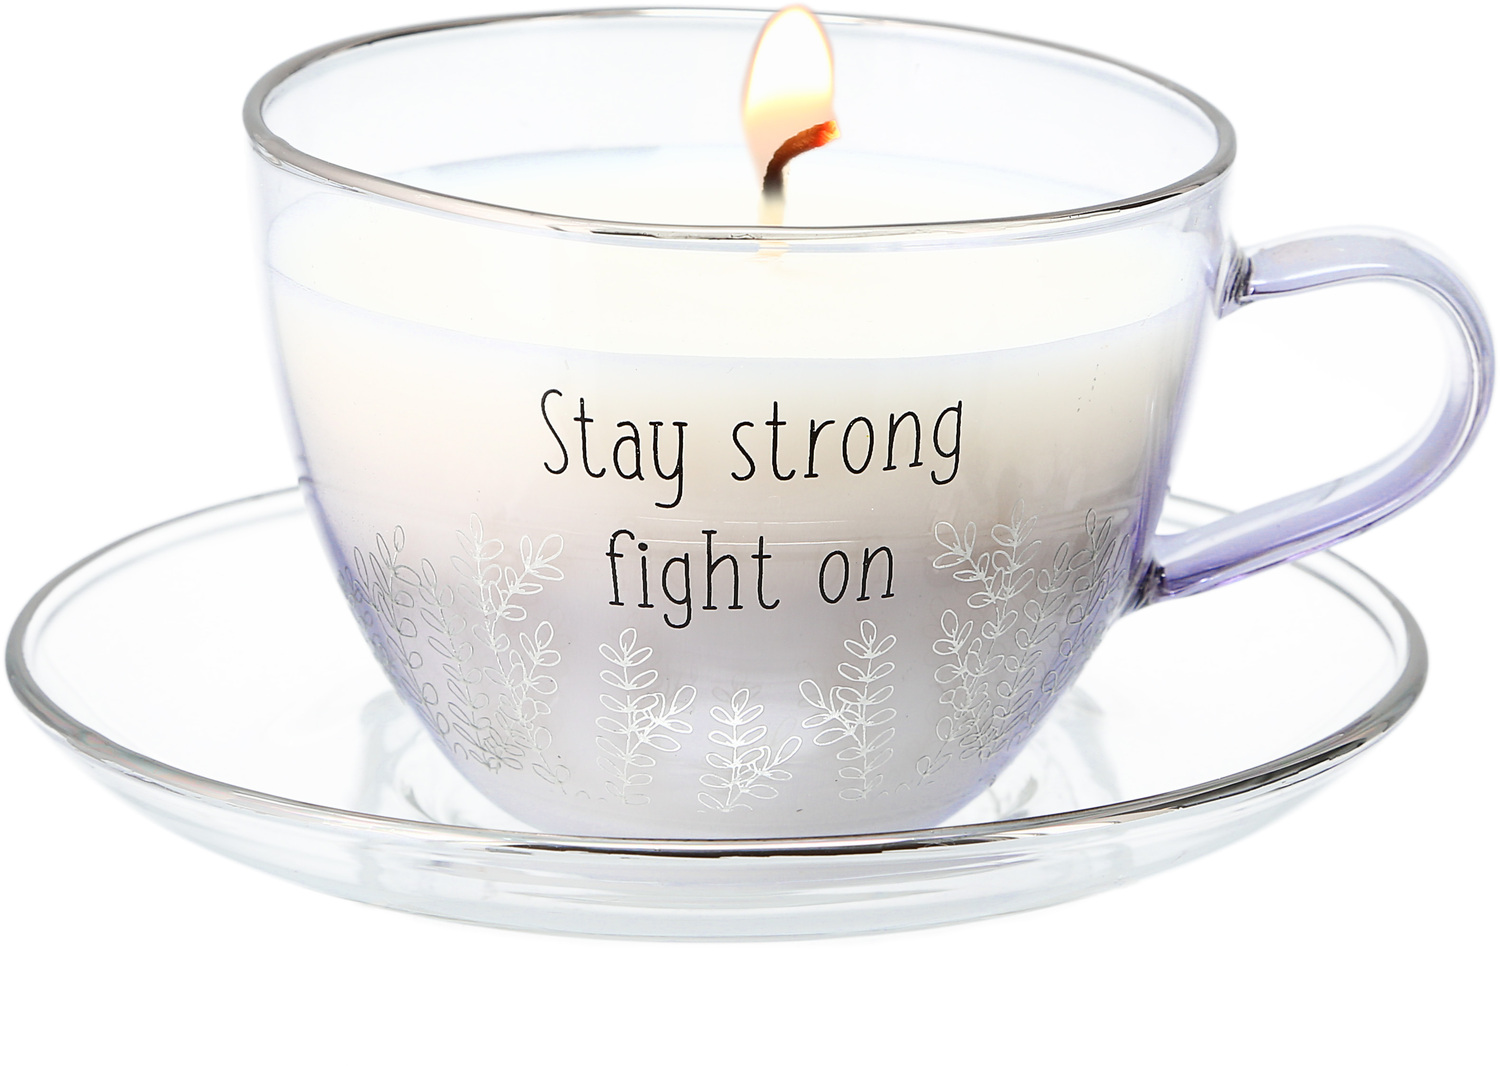 Stay Strong by Faith Hope and Healing - Stay Strong - 6 oz - 100% Soy Wax Tea Cup Candle with Saucer
Scent: Fresh Cotton